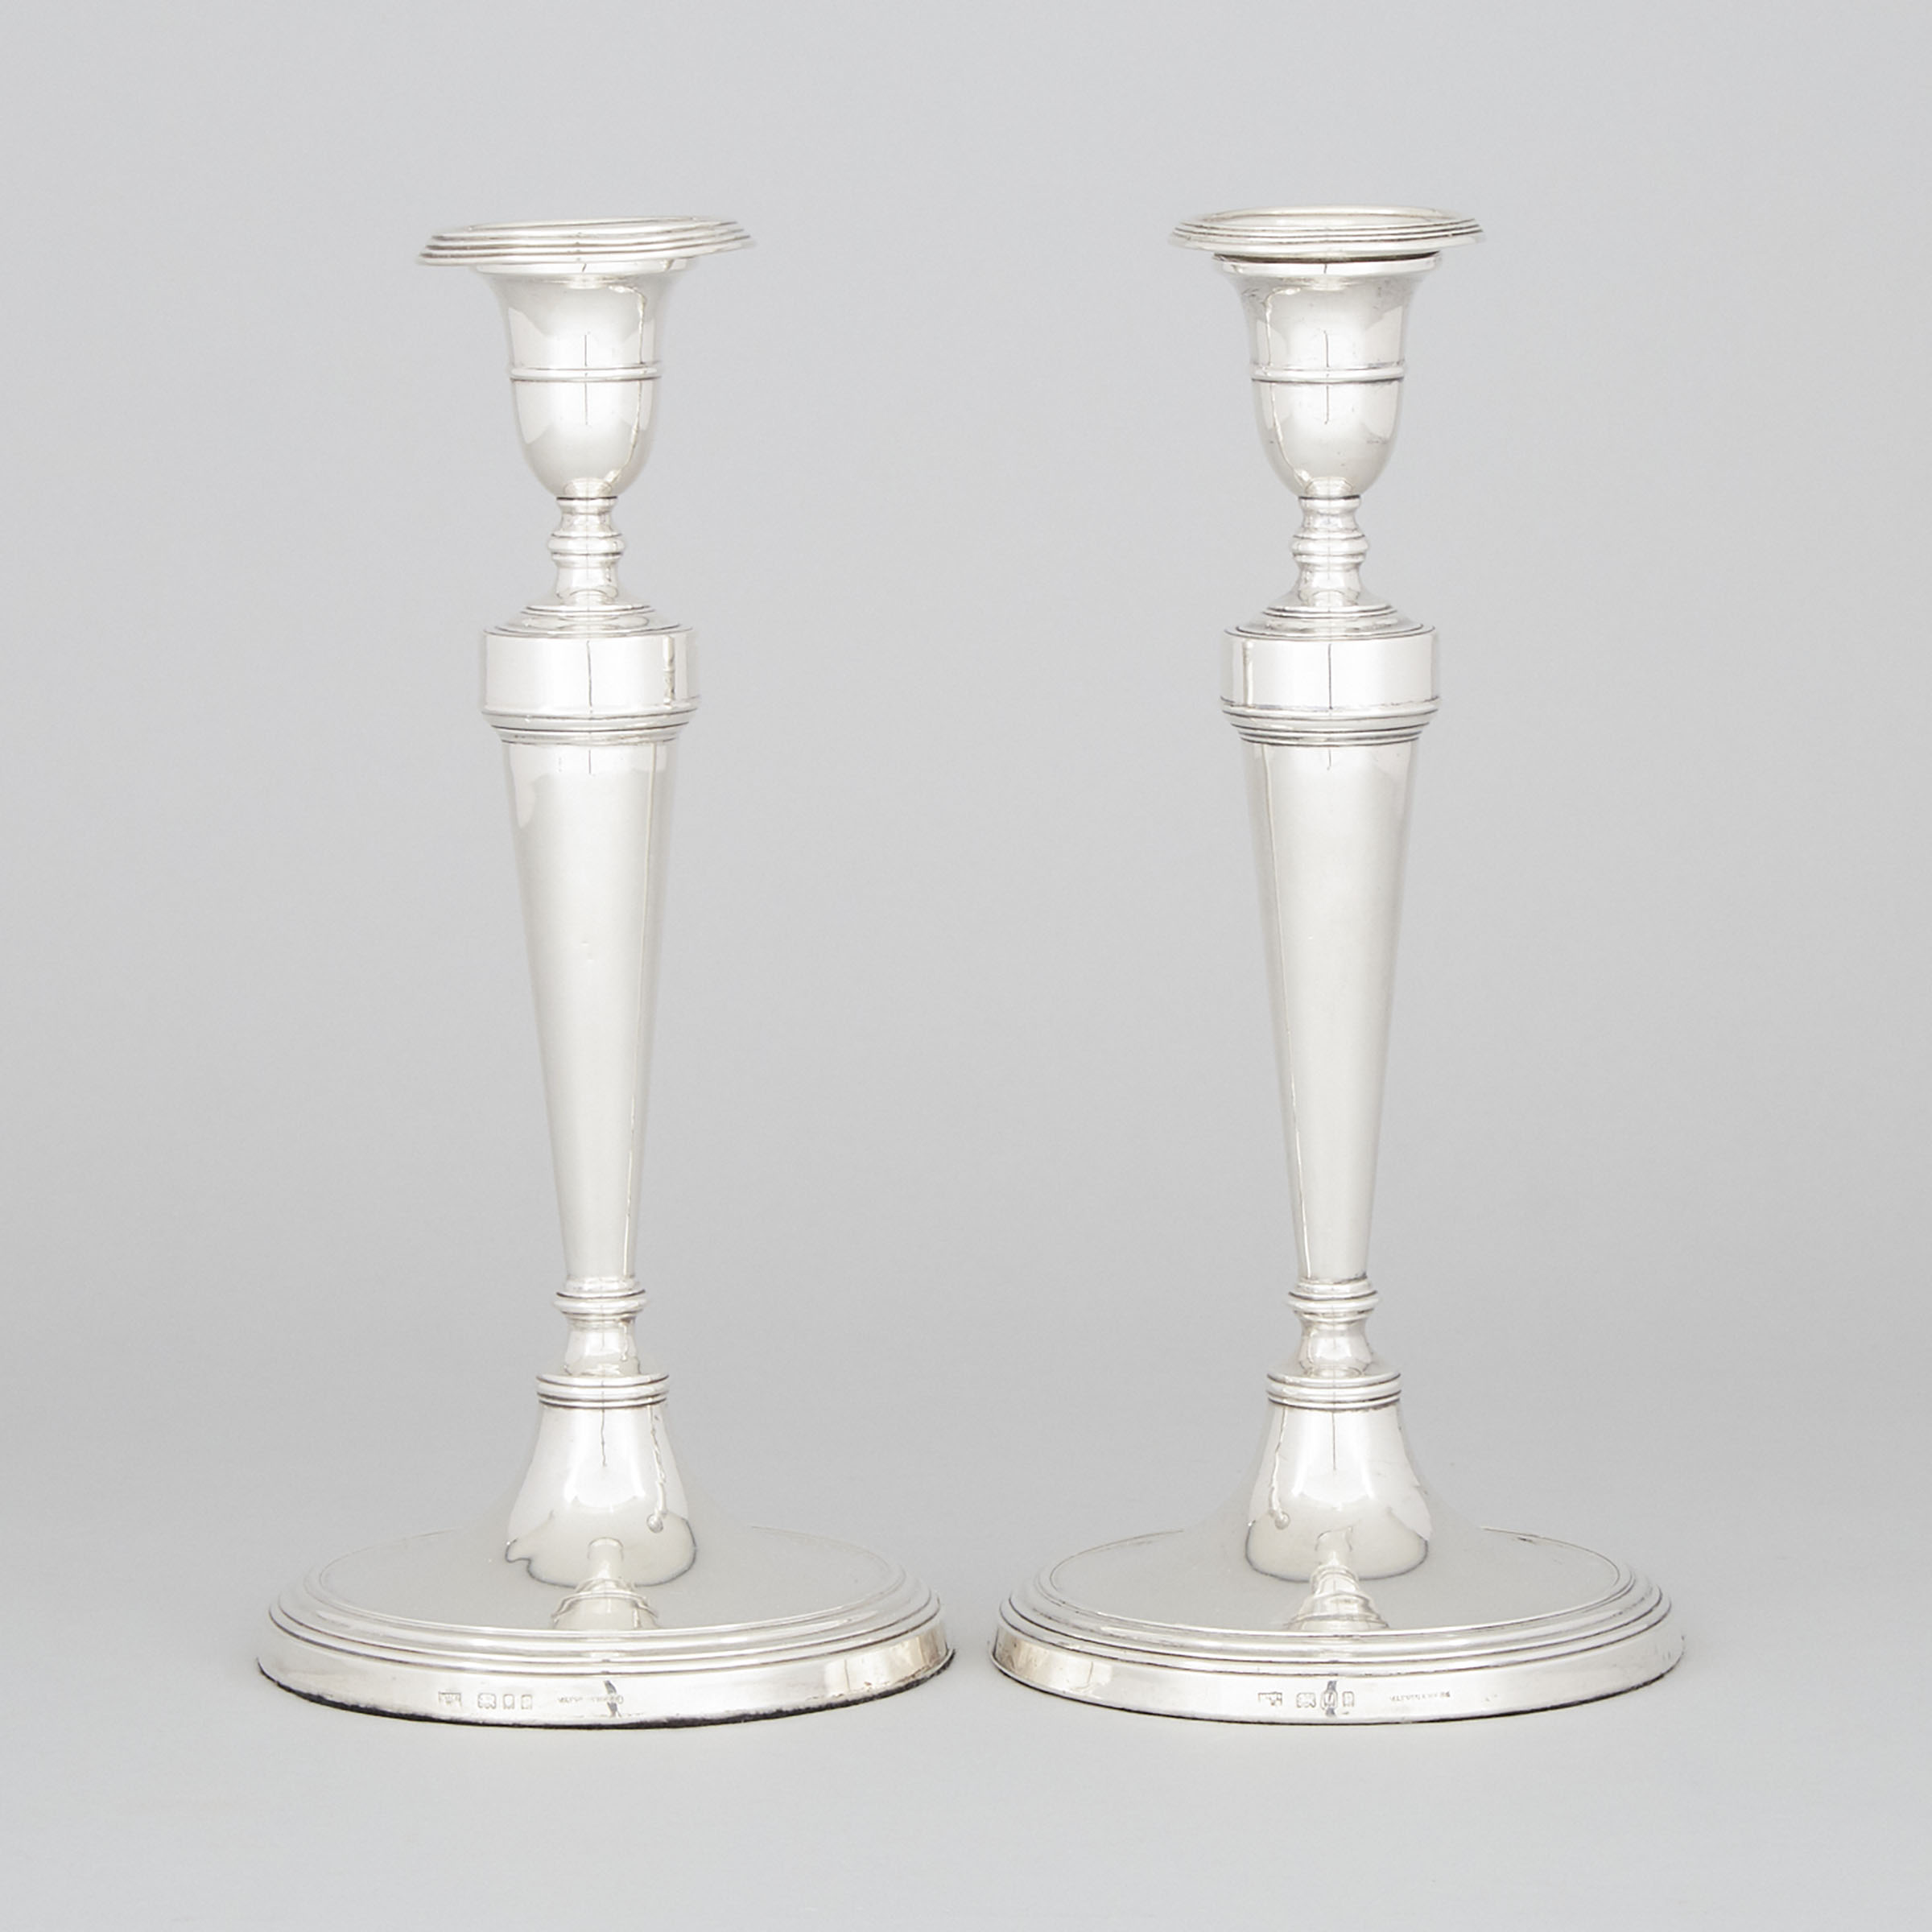 Pair of English Silver Table Candlesticks, Mappin & Webb, 1930